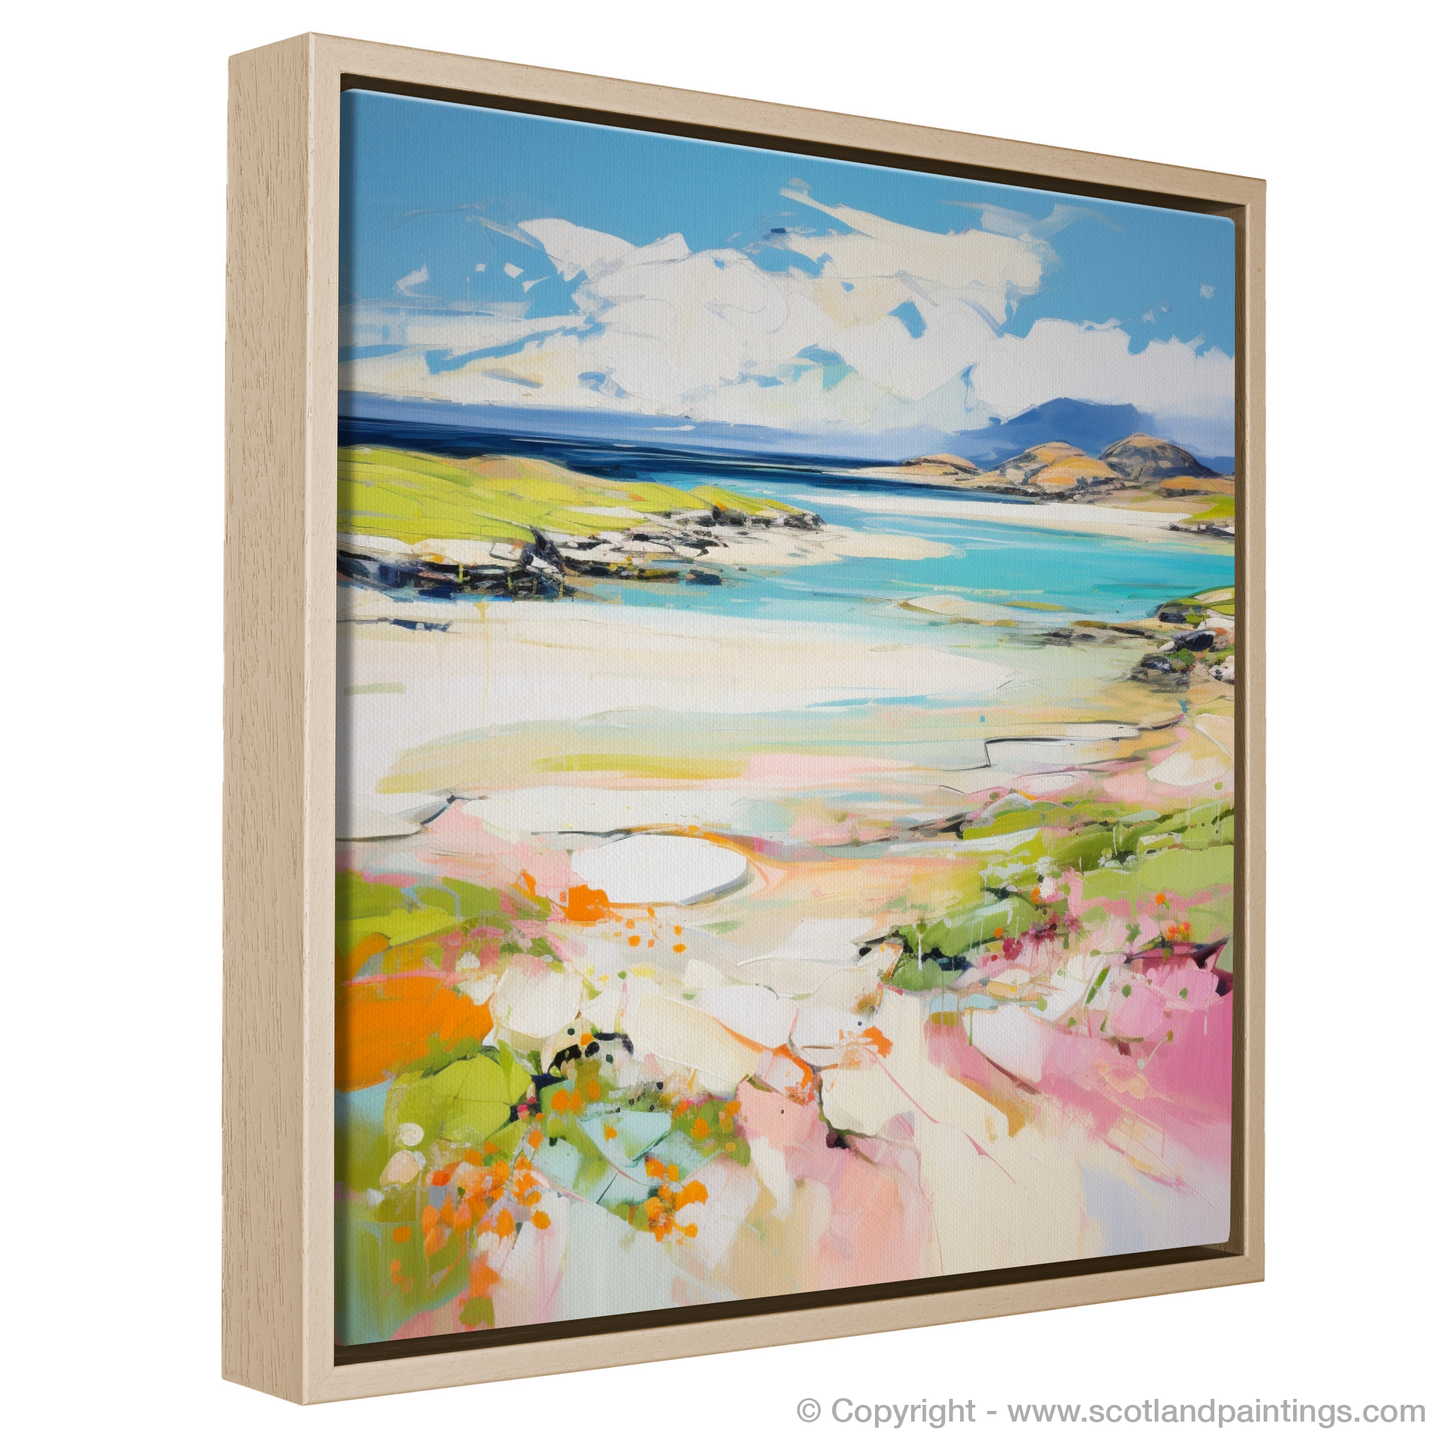 Painting and Art Print of Isle of Barra, Outer Hebrides in summer entitled "Summer Splendour of Isle of Barra".